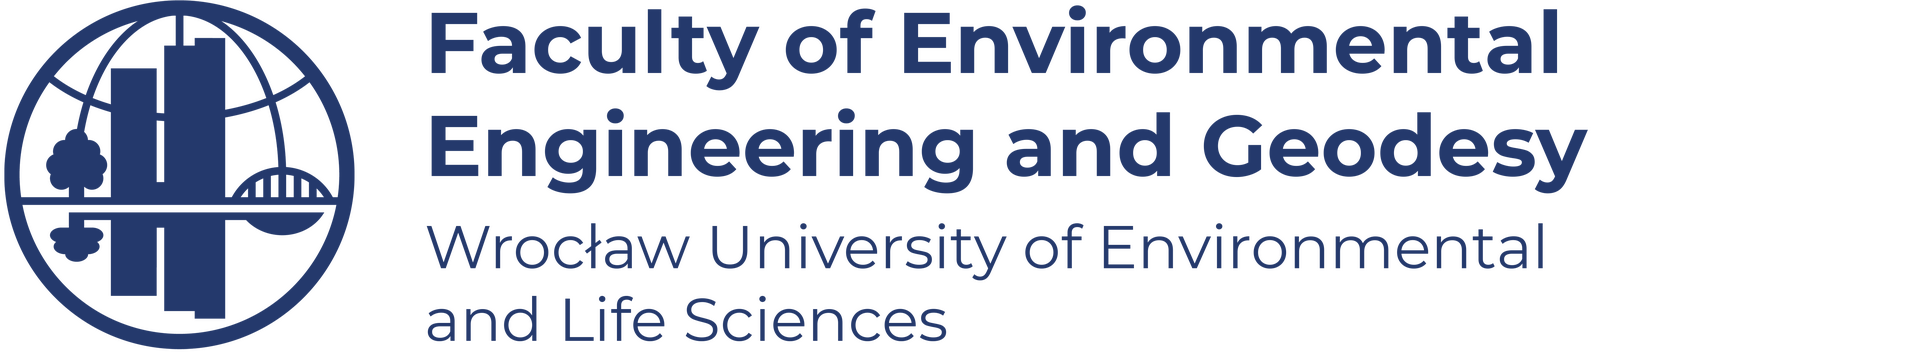 Faculty of Environmental Engineering and Geodesy